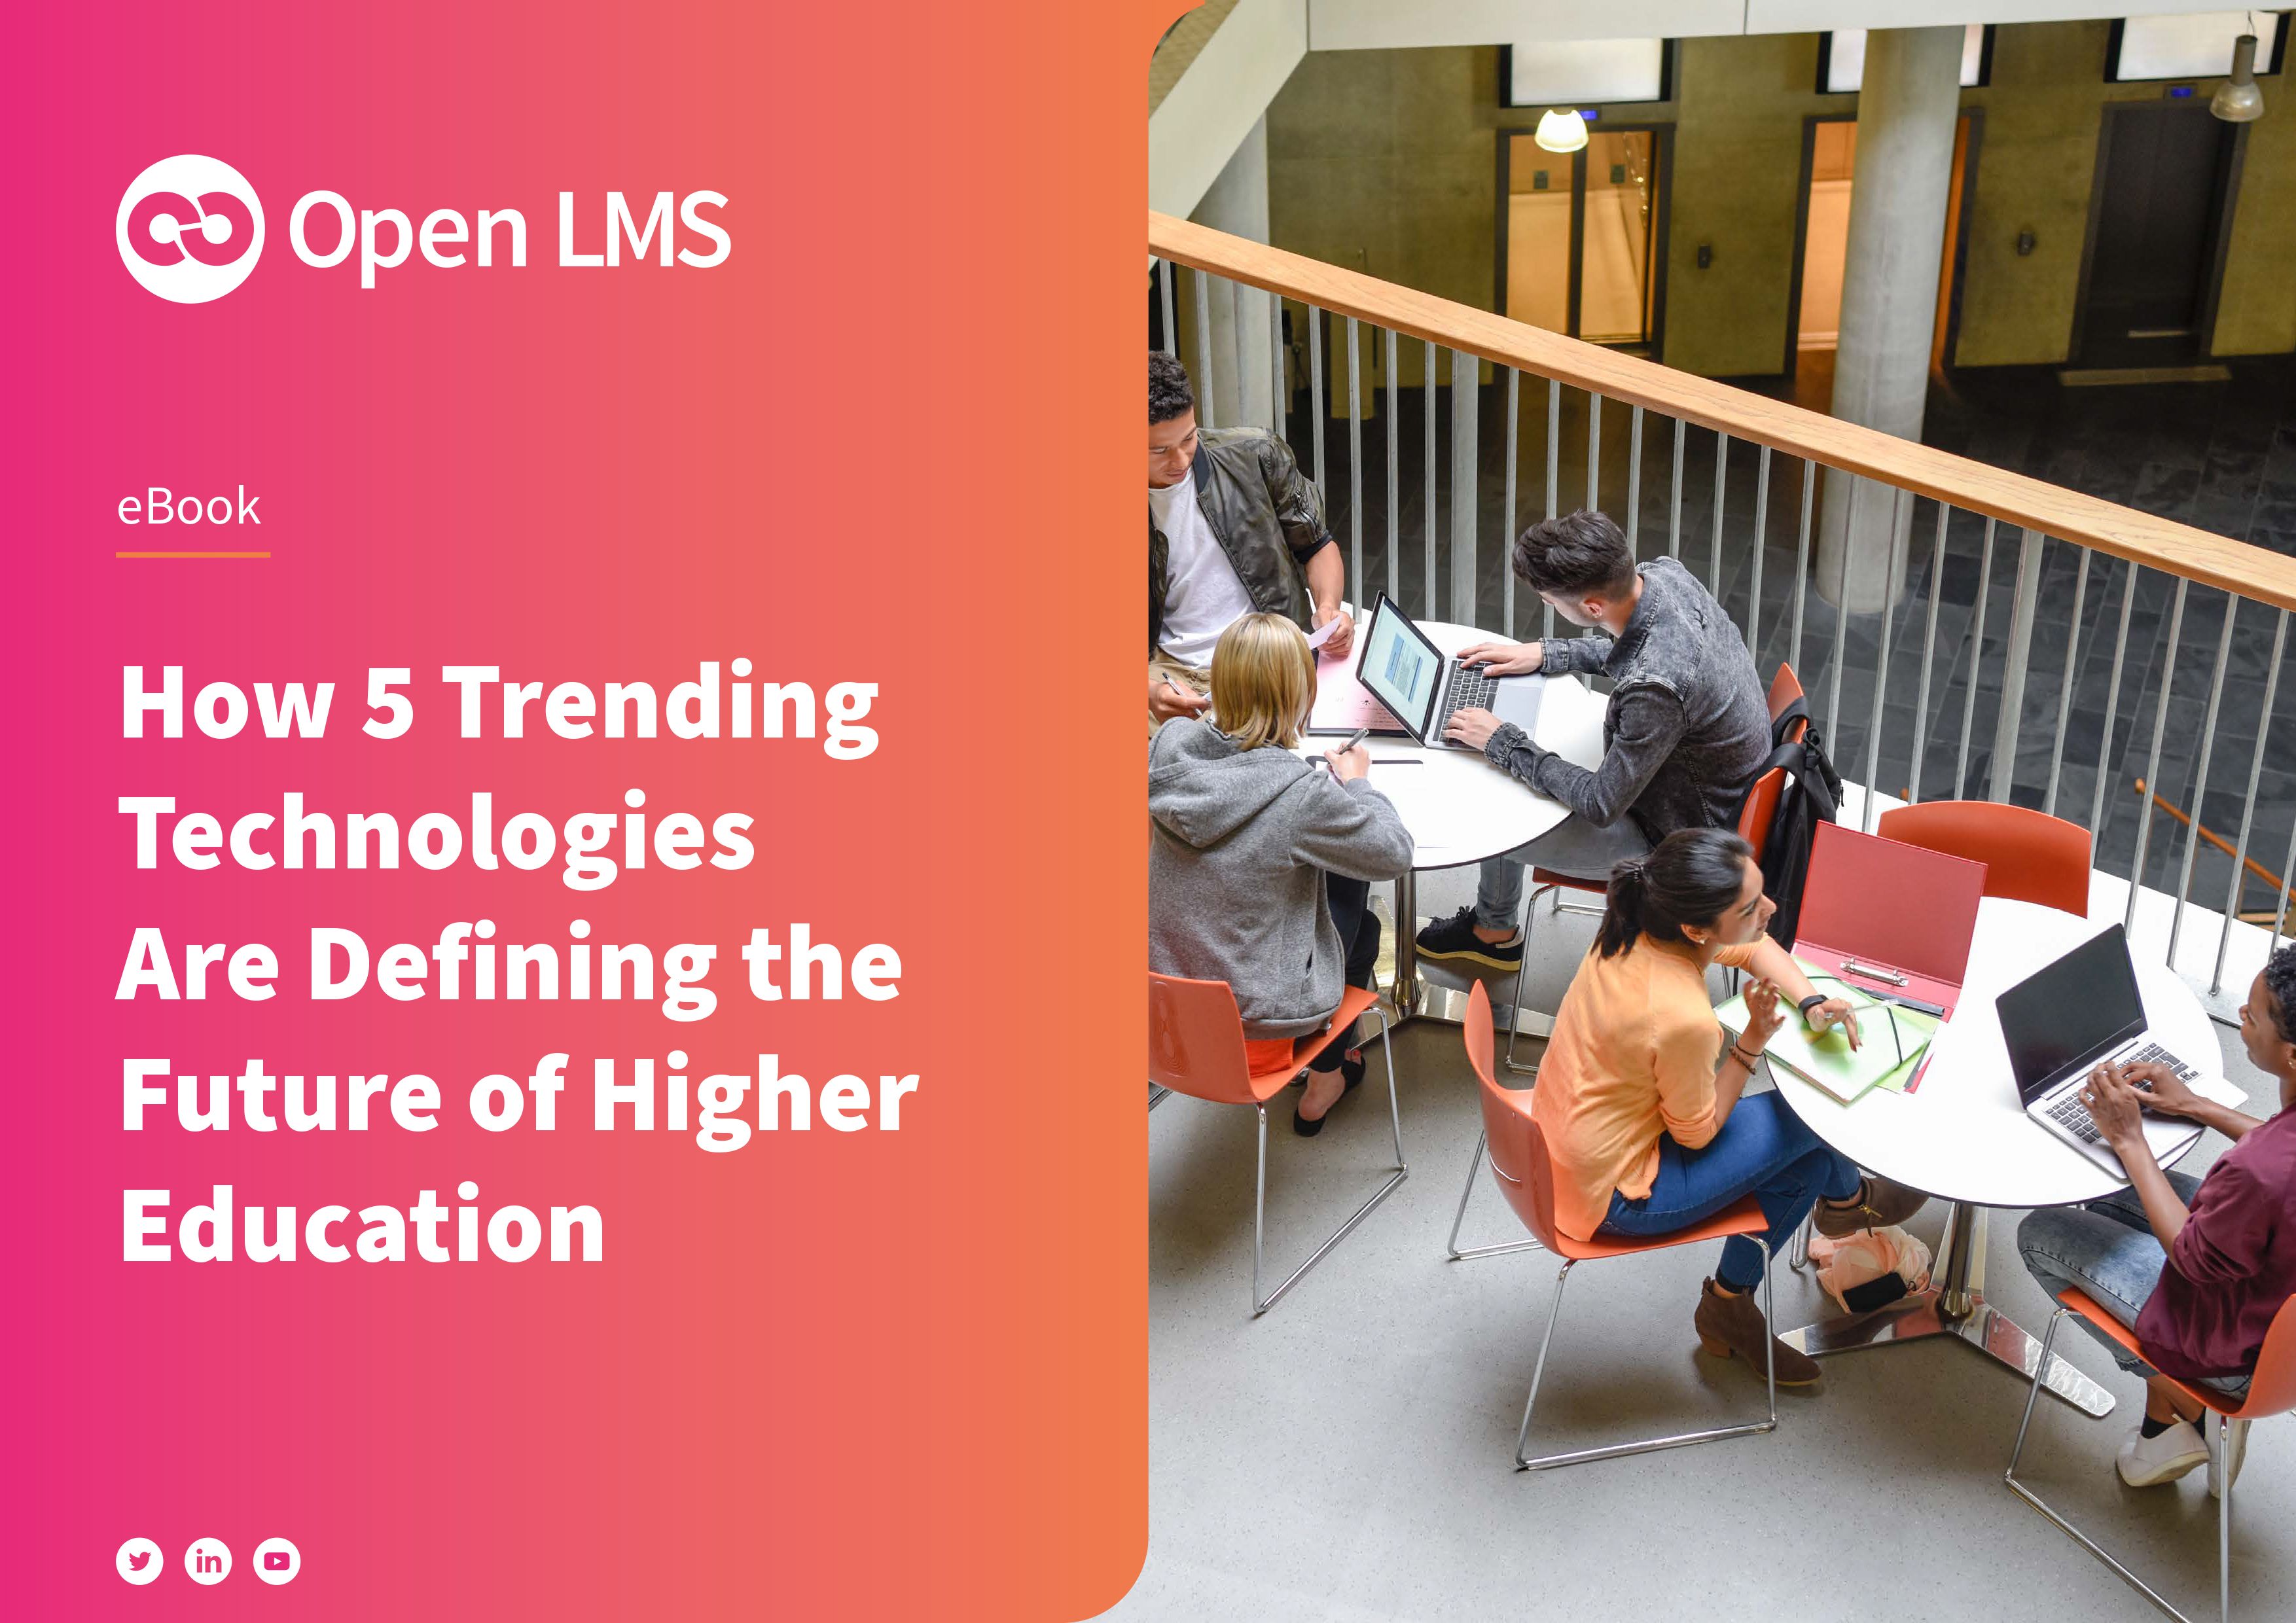 How 5 Trending Technologies Are Defining the Future of Higher Education